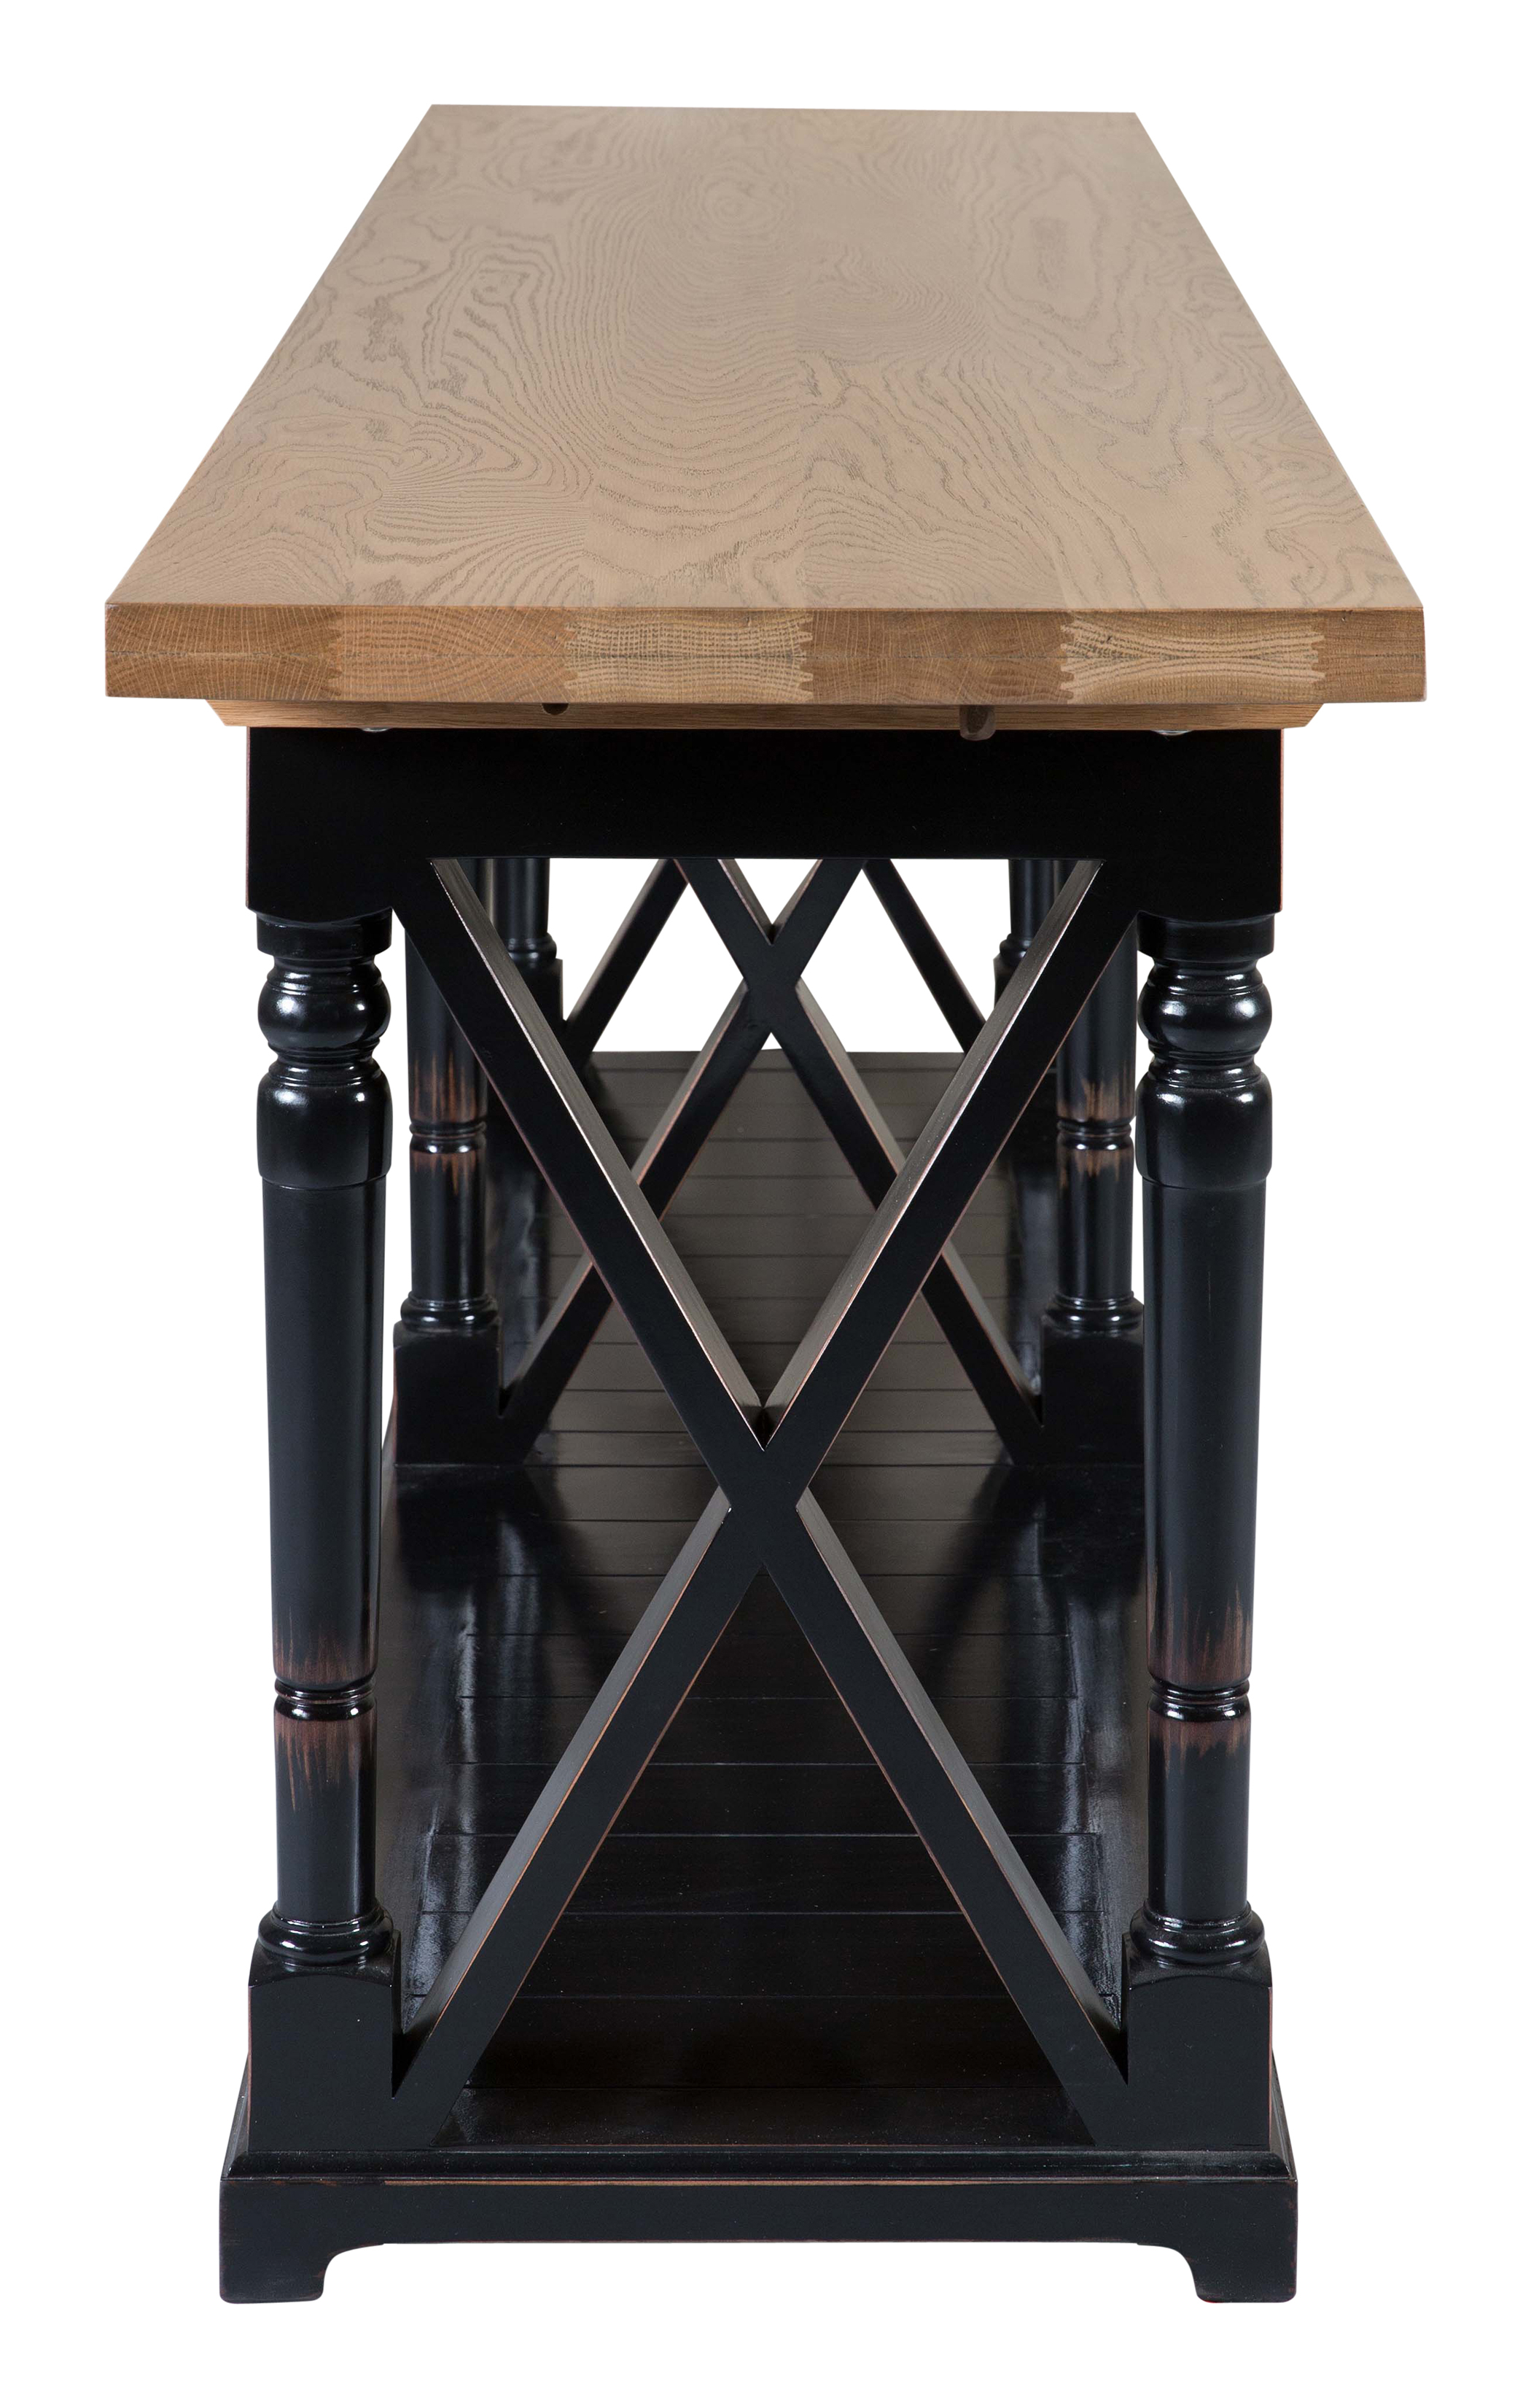 Block & Chisel weathered oak server with black lacquer base